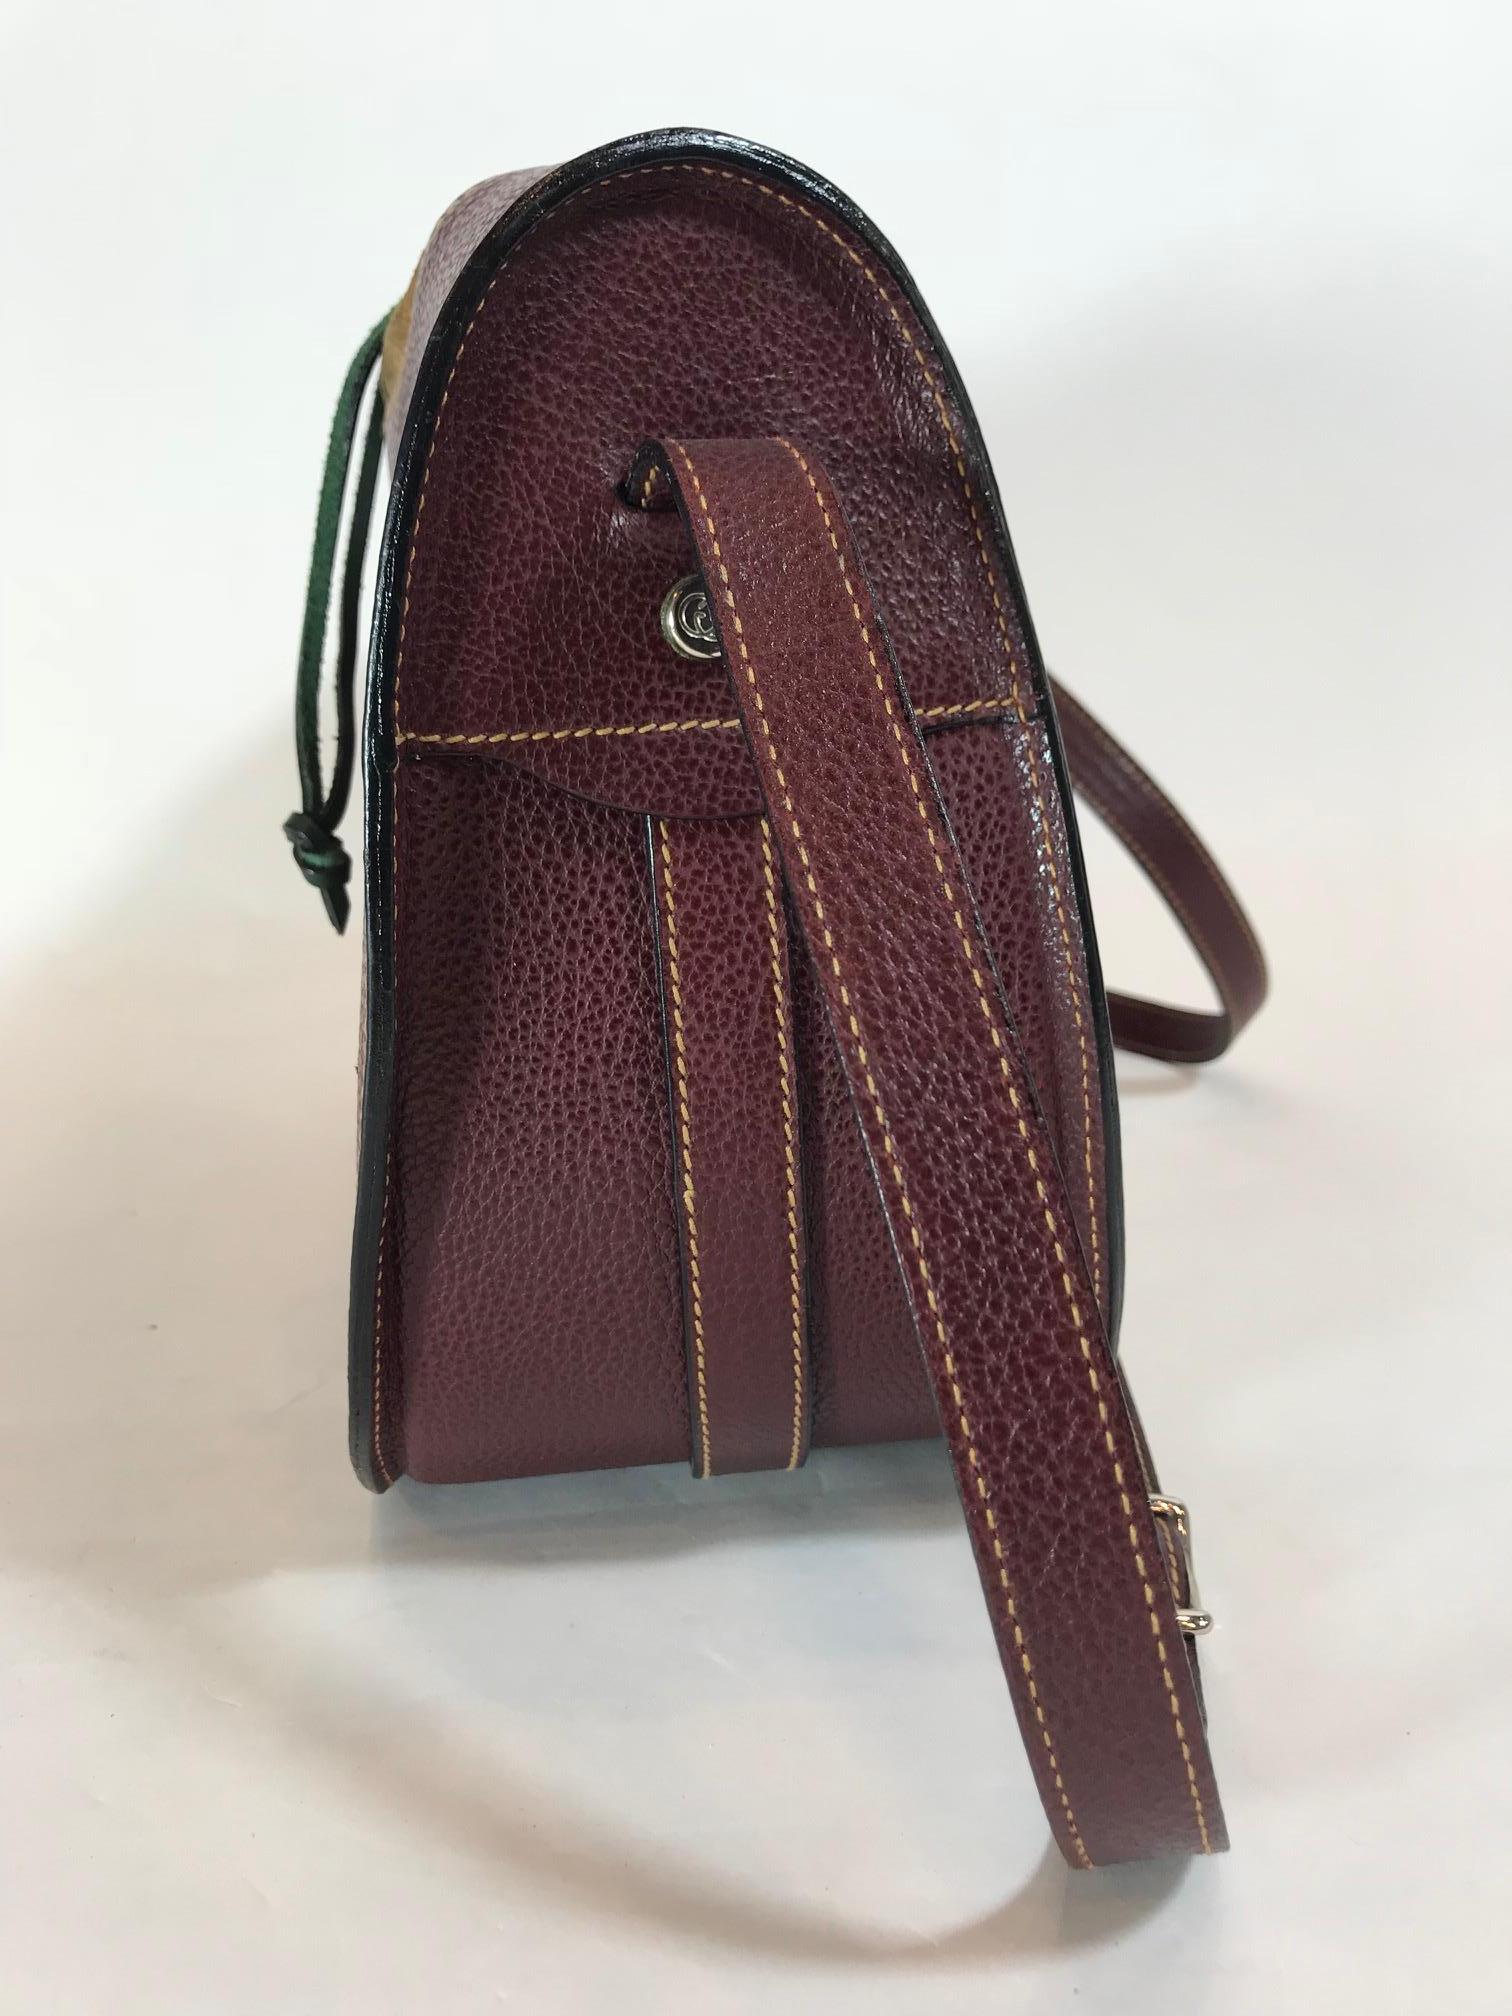 Dark burgundy leather with tan suede top. Silver-tone hardware. Green suede drawstring closure. Green leather bullet holster strap along front of bag Adjustable shoulder strap. Tan suede interior. One interior zippered pocket.